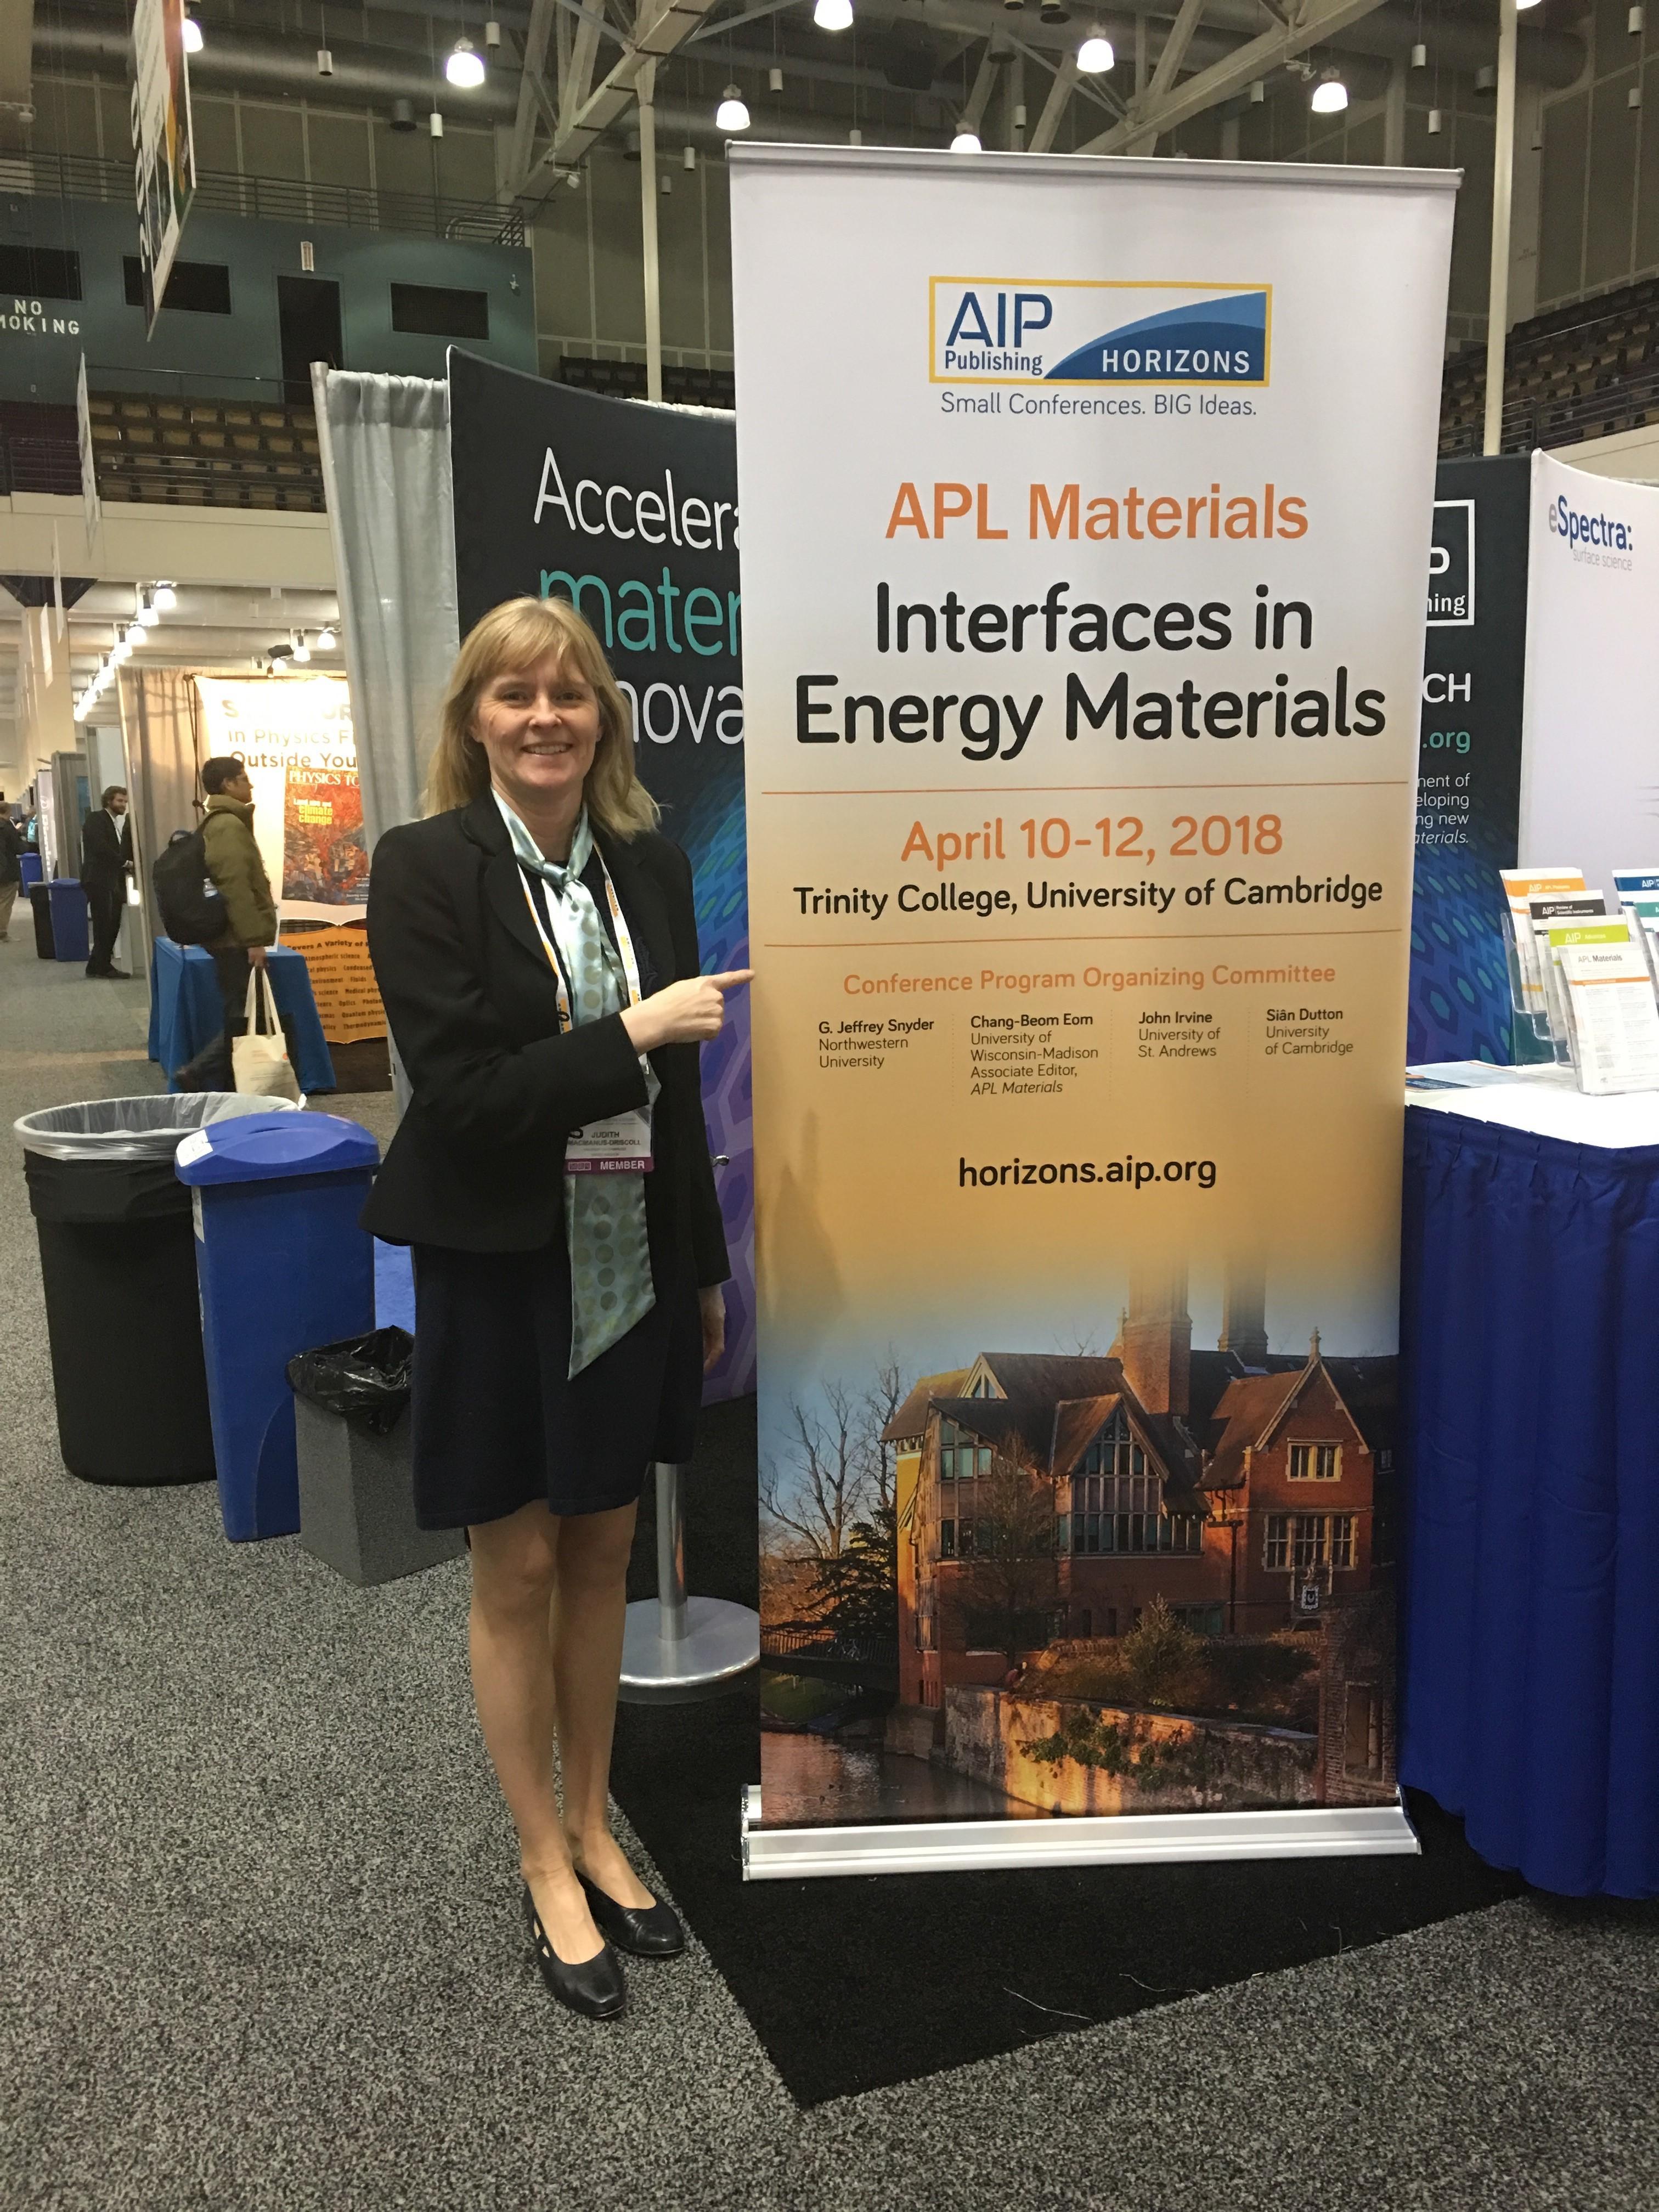 Prof. Driscoll at the Fall MRS meeting in Boston, Dec. 2017, advertising the APL Materials meeting on “Interfaces in Energy Materials, 10-12 April, 2018, Trinity College, Cambridge, U.K.